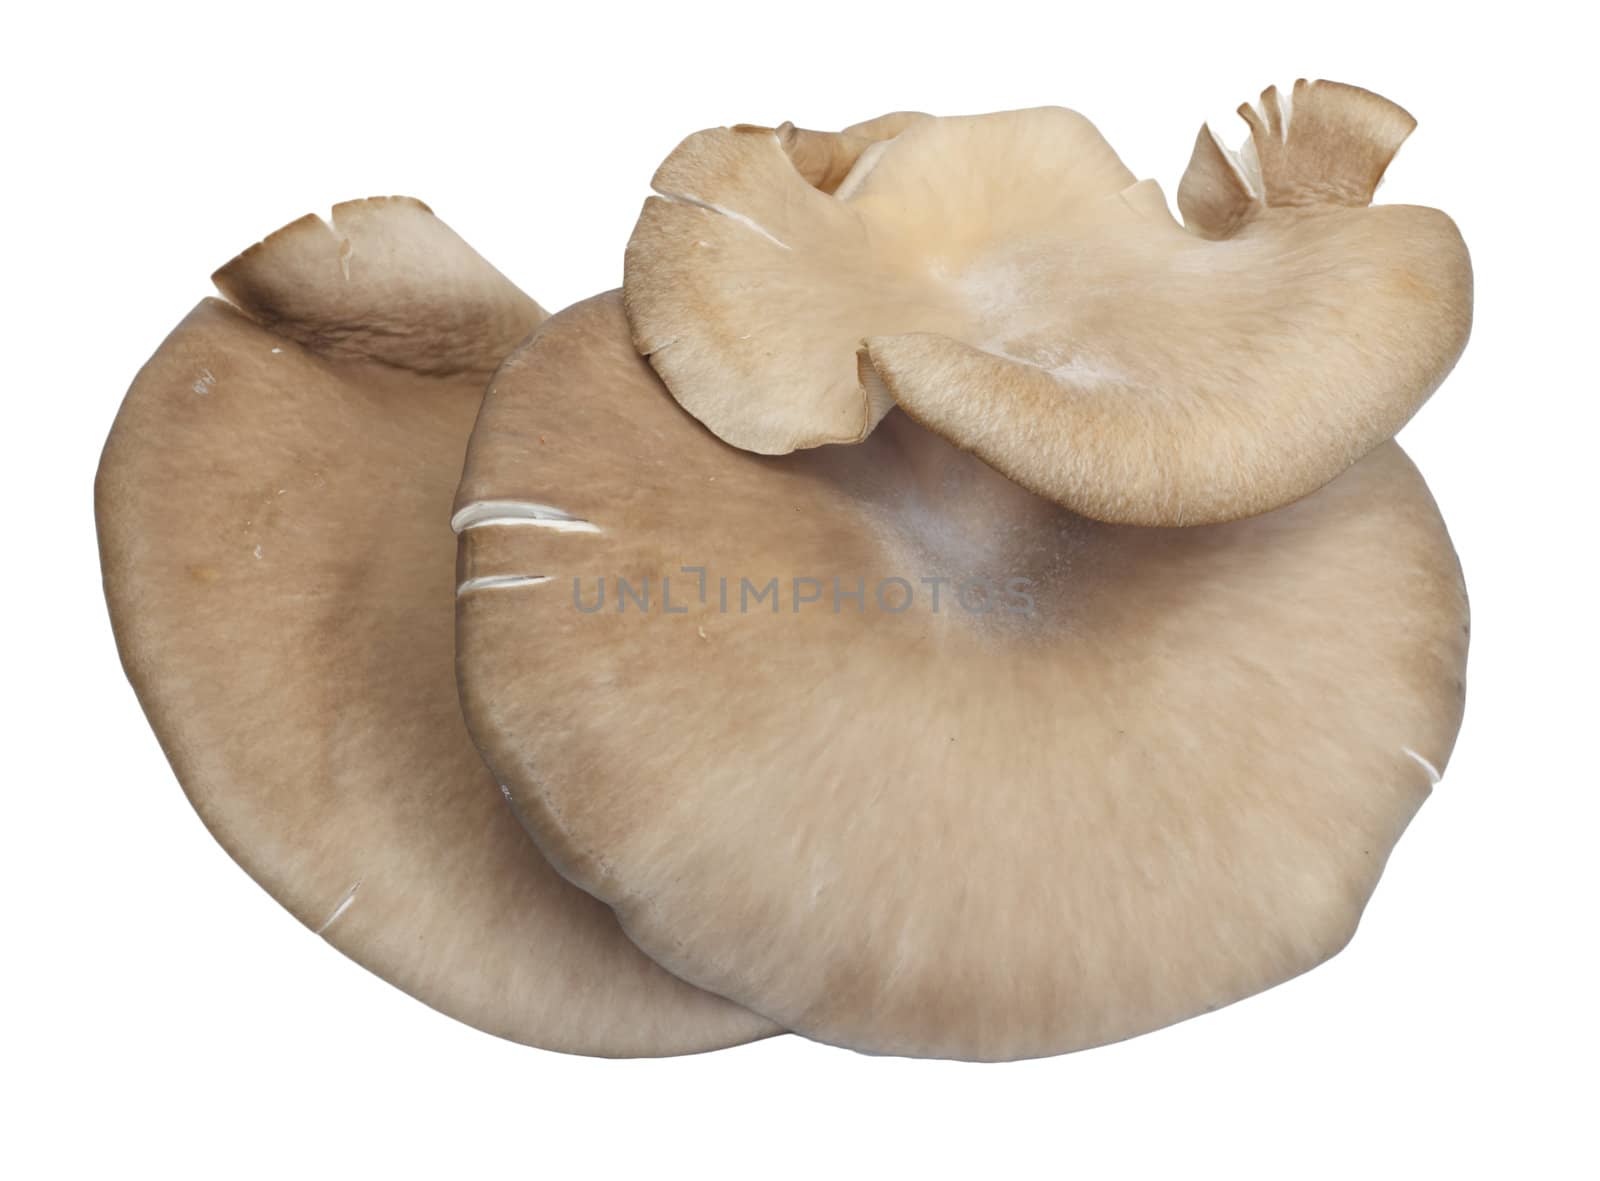 Oyster mushrooms on a white background  by schankz